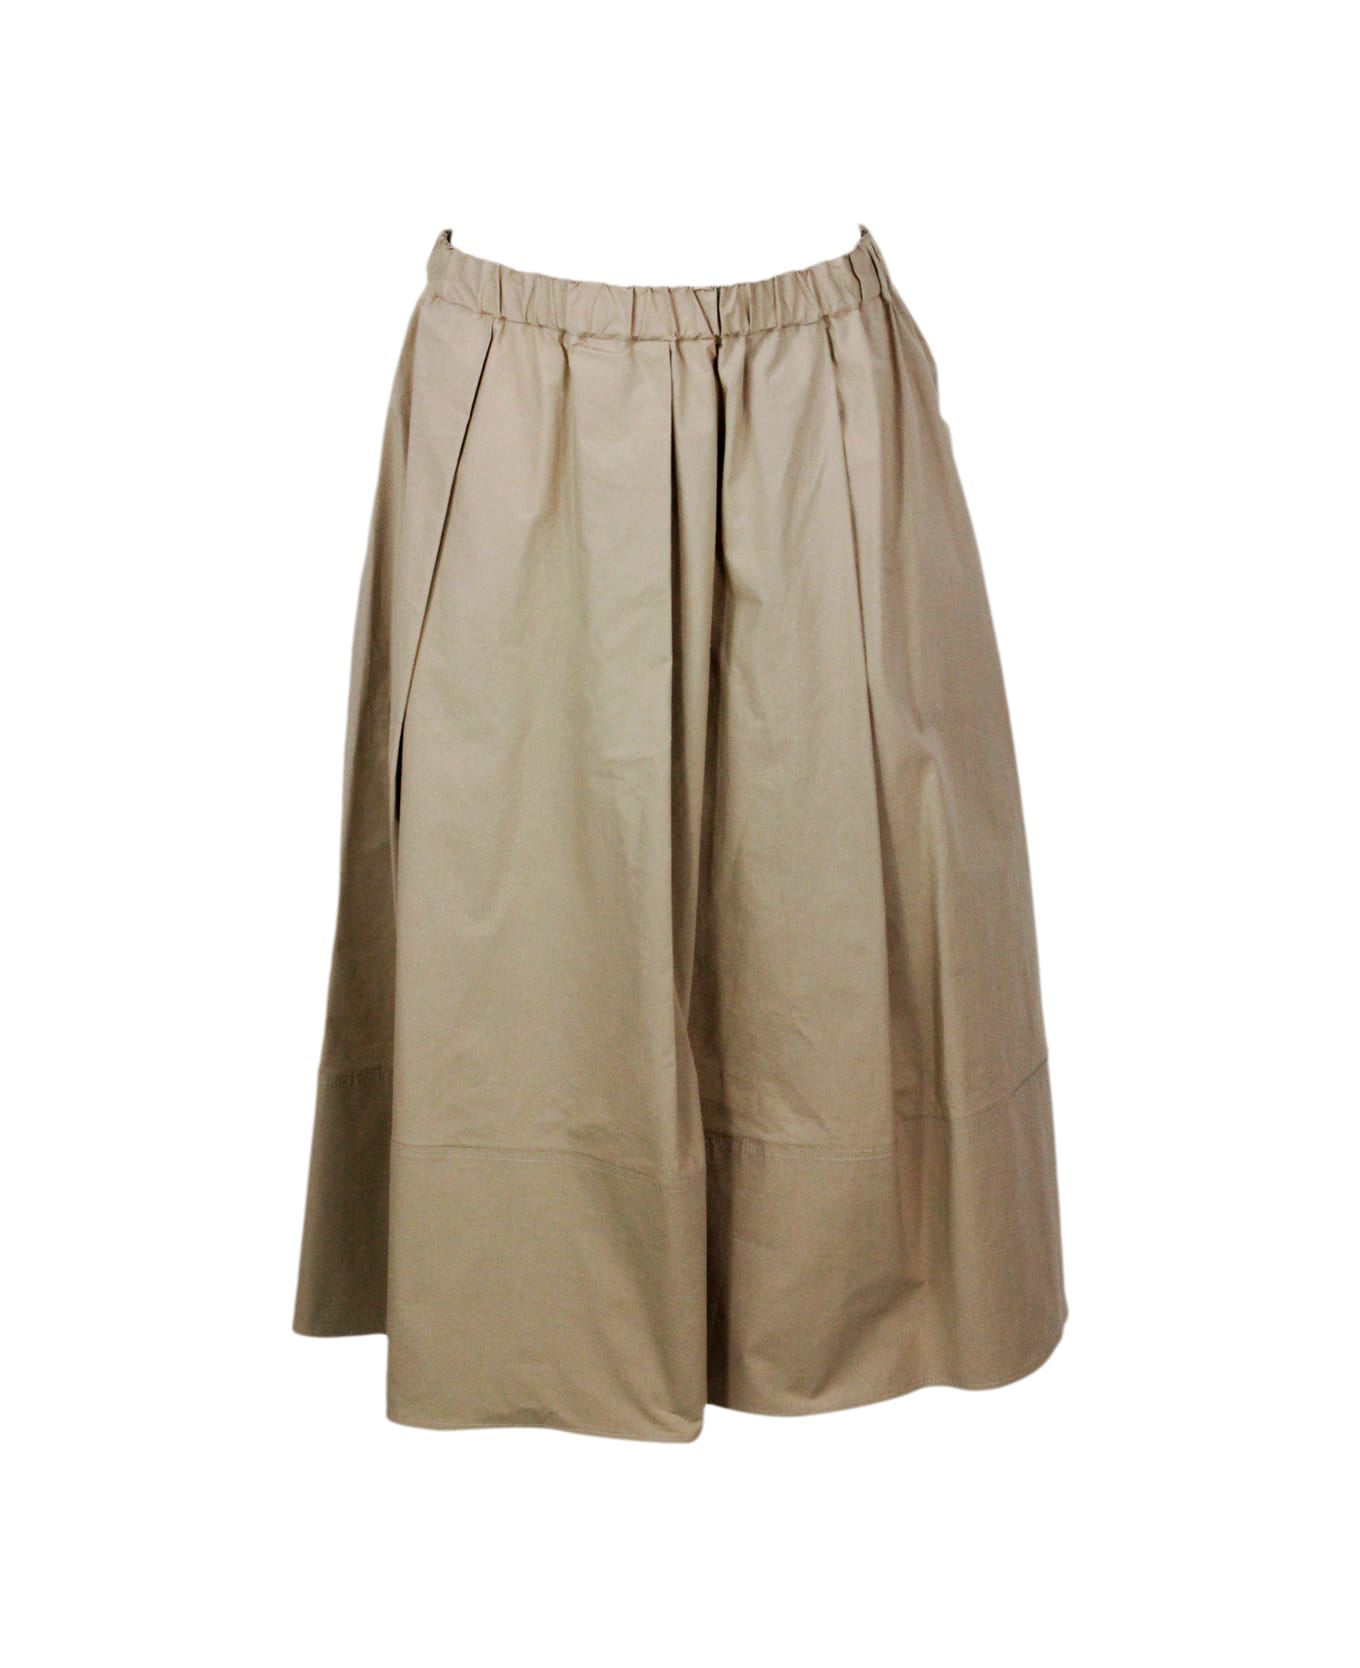 Antonelli Long Skirt With Elastic Waist And Welt Pockets With Pleats Made Of Stretch Cotton - Beige